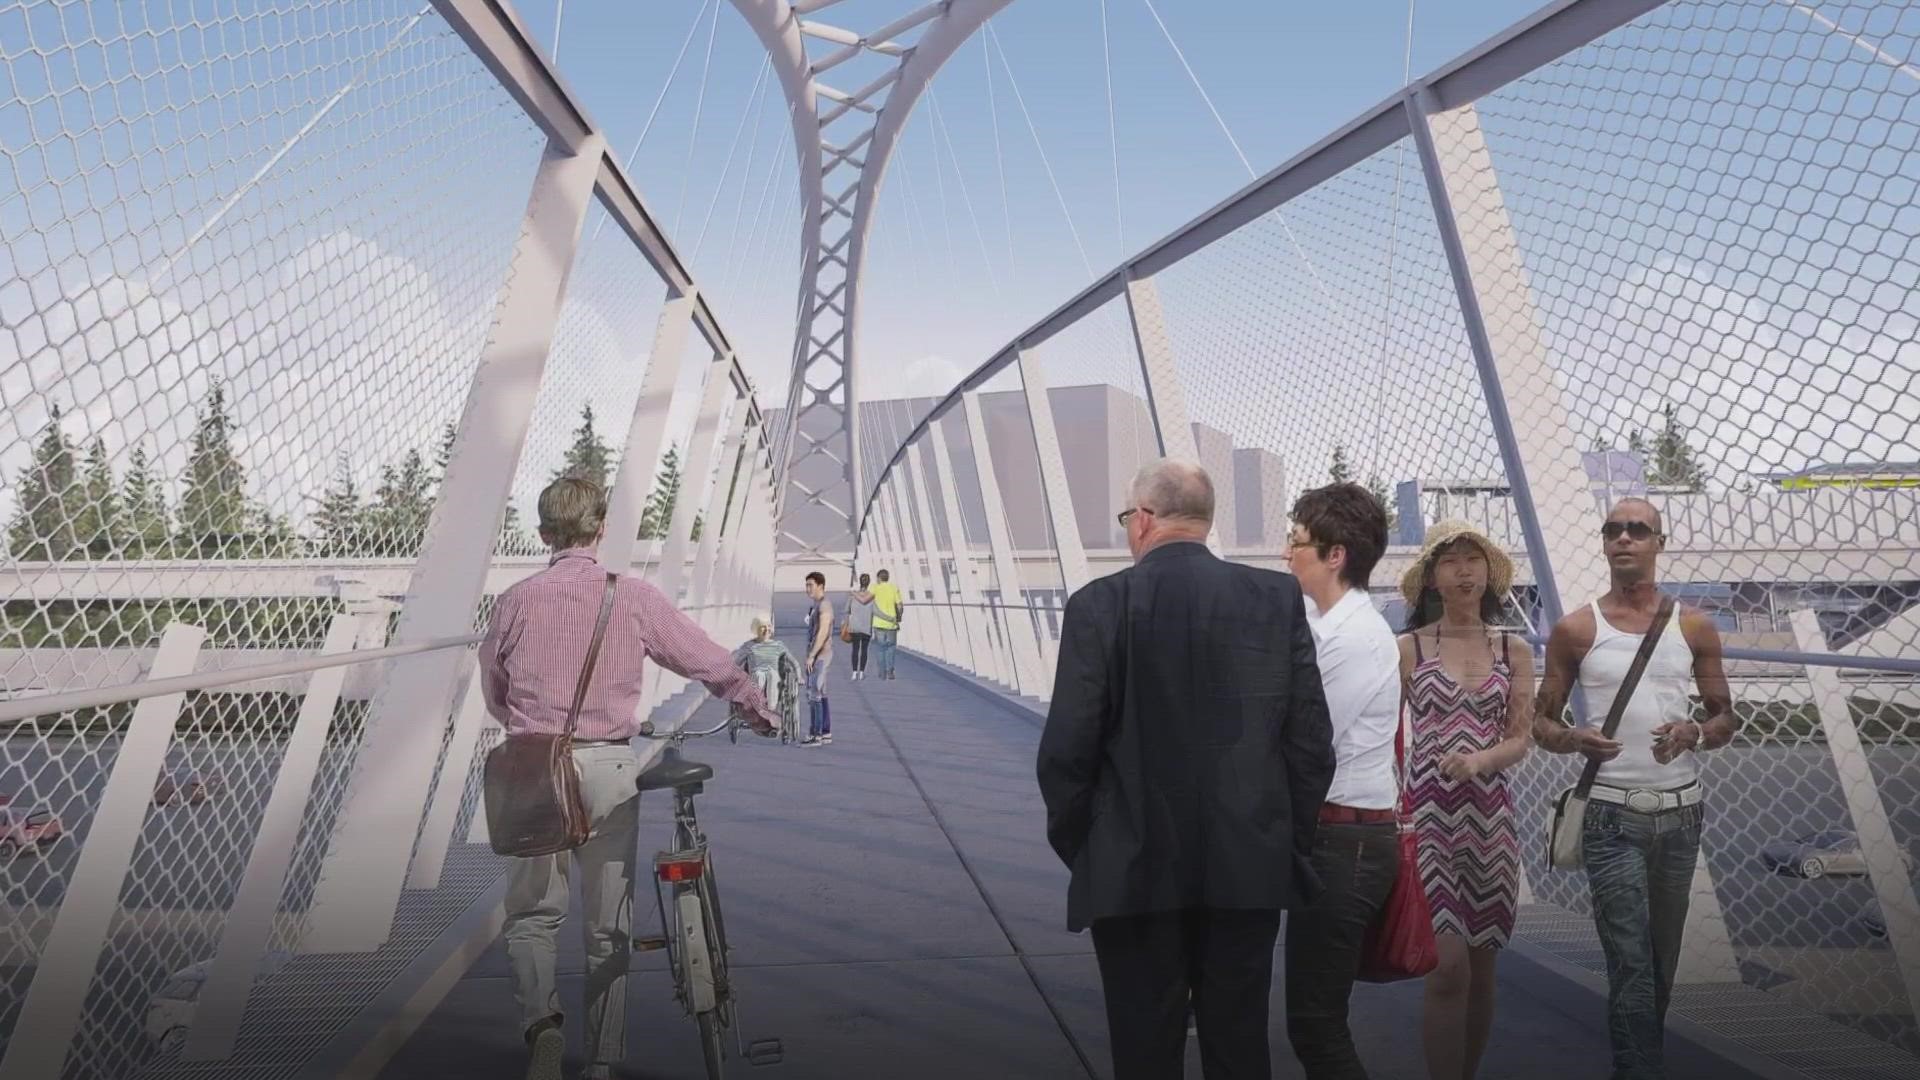 The North 148th Street Non-Motorized Bridge will go over I-5 and pass under the light rail line to connect thousands of households to the regional transit system